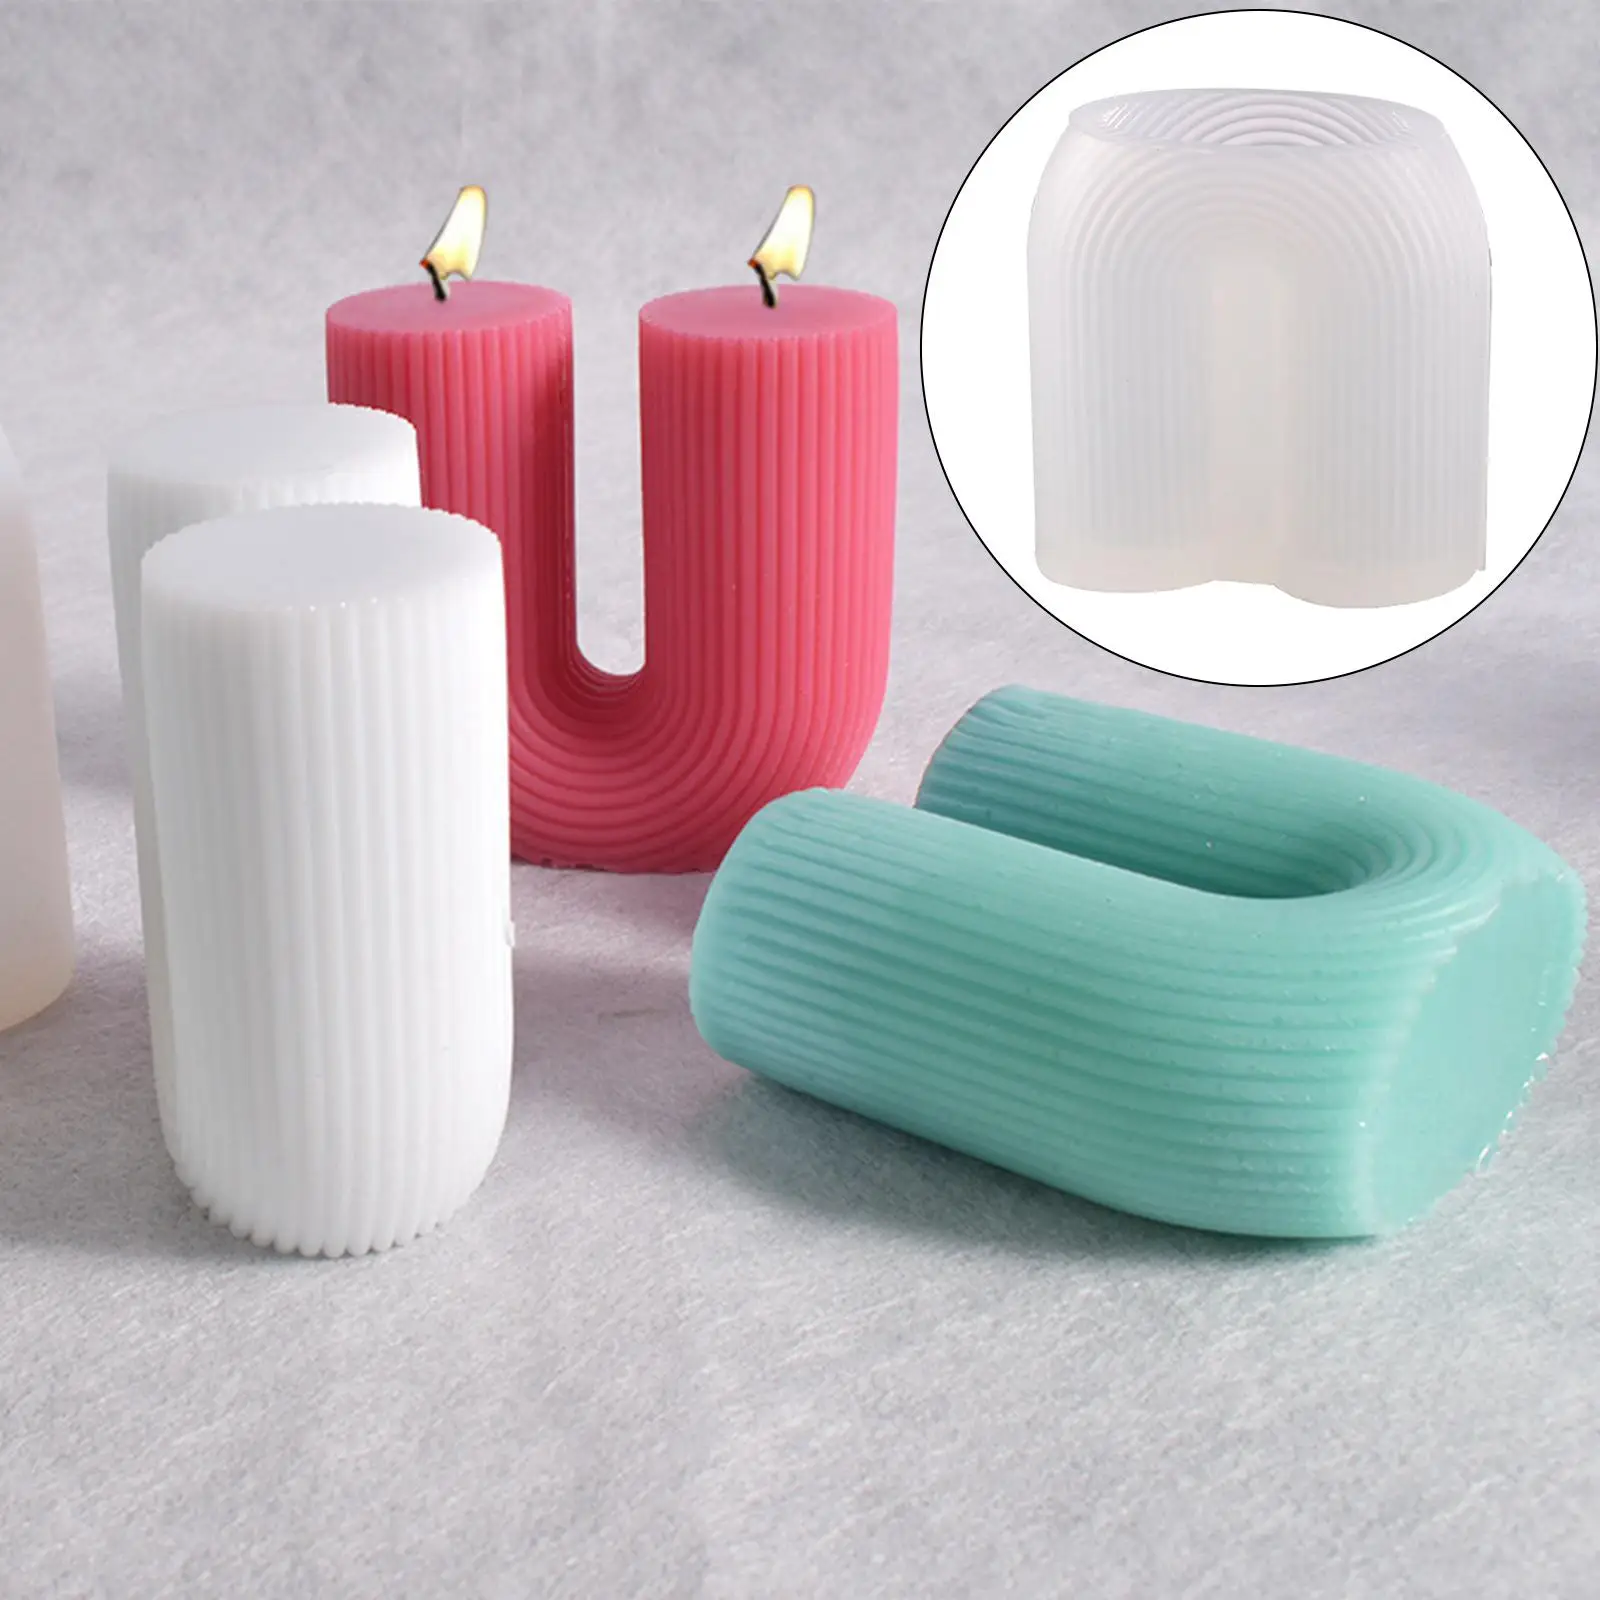 U Shape 3D Candle Epoxy Casting candle DIY Crafts Handmade for Wedding Valentine Home Ornaments